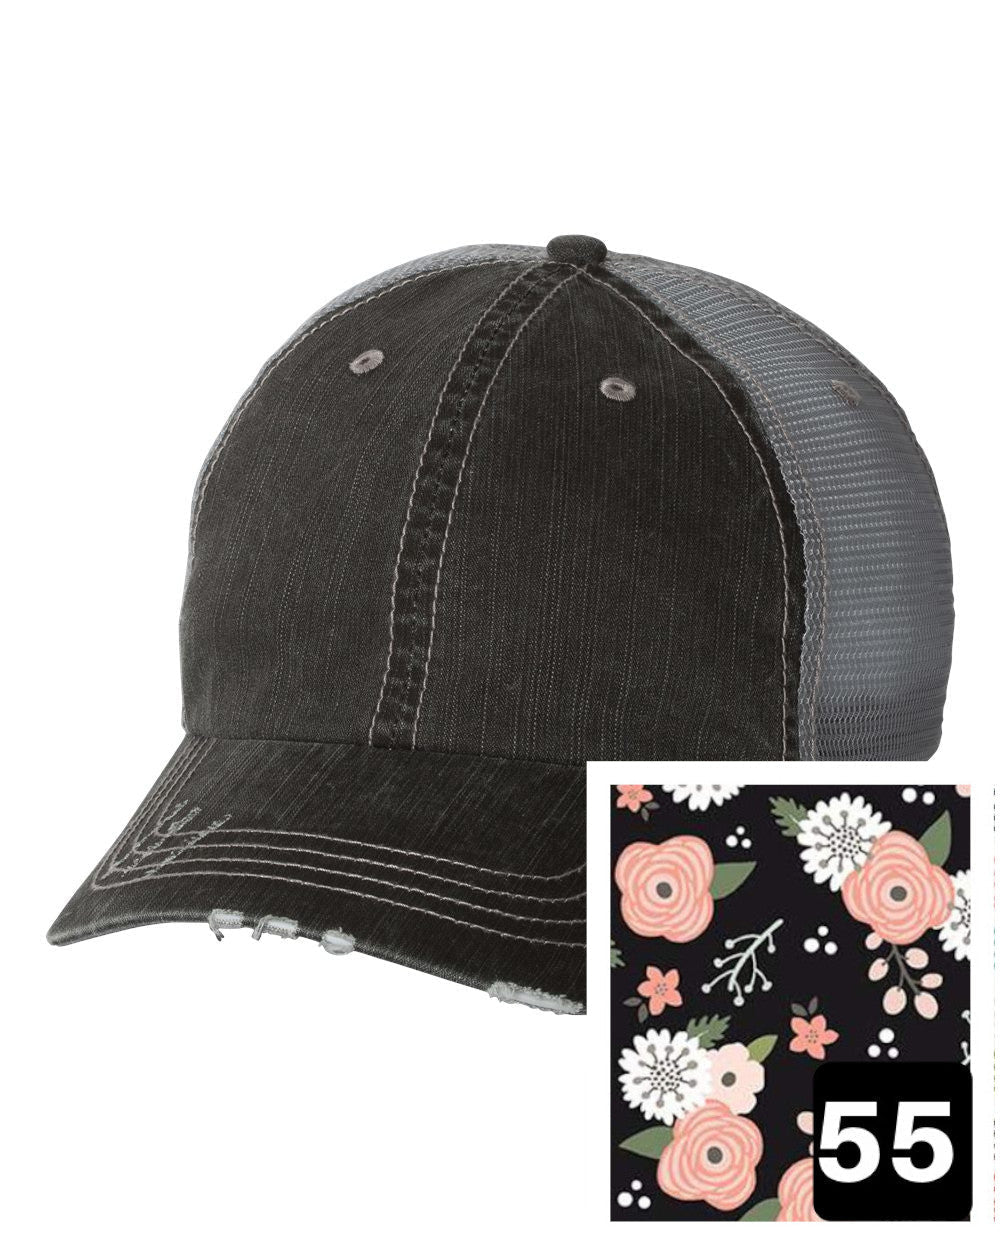 gray distressed trucker hat with petite floral on navy fabric state of Colorado